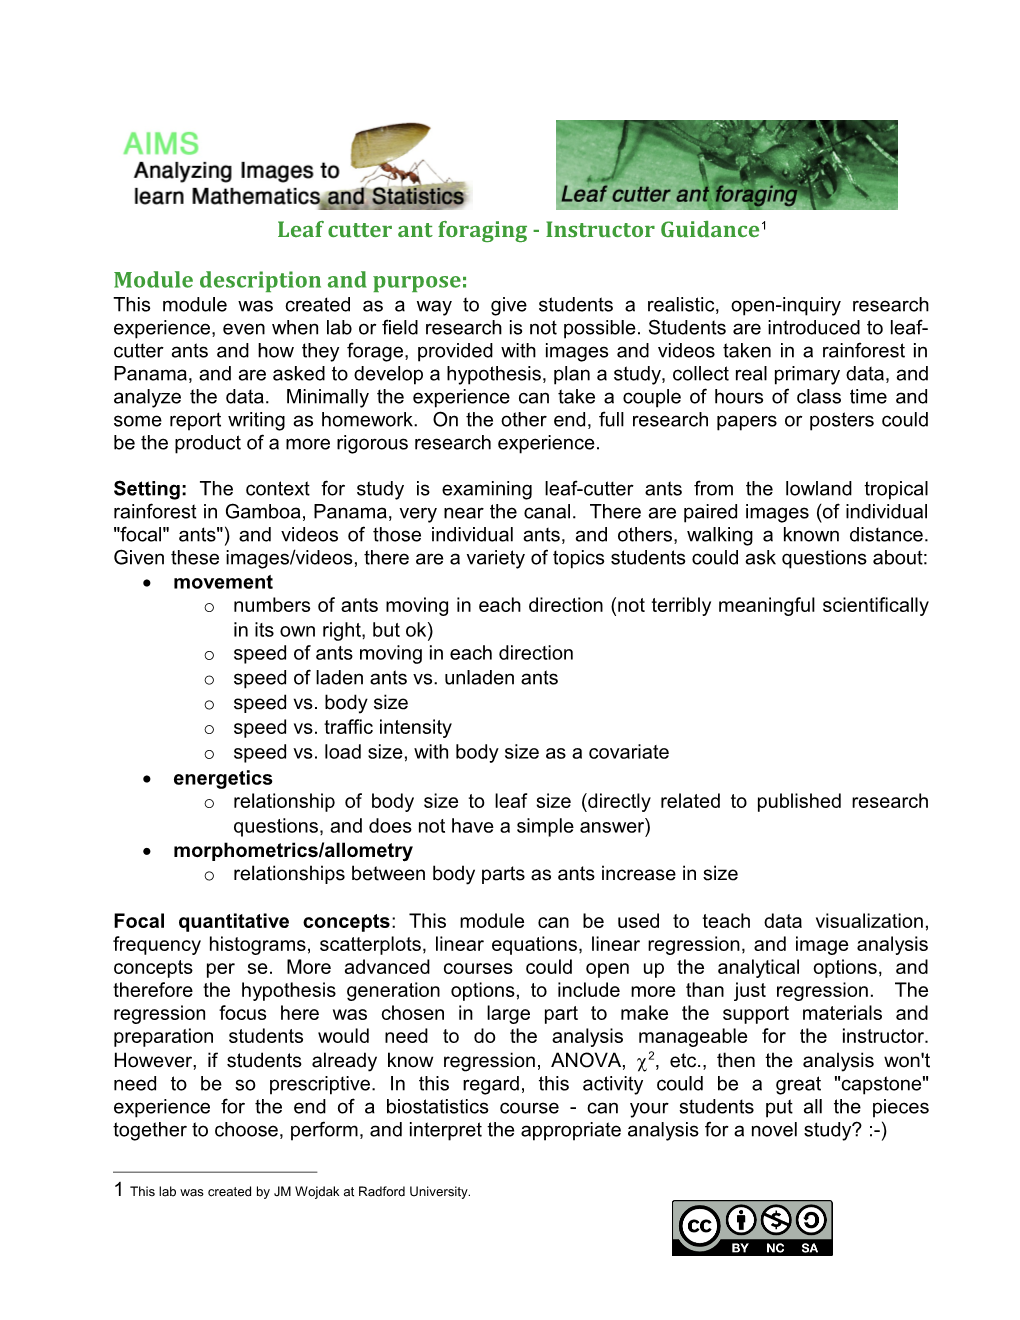 Leaf Cutter Ant Foraging - Instructor Guidance 1